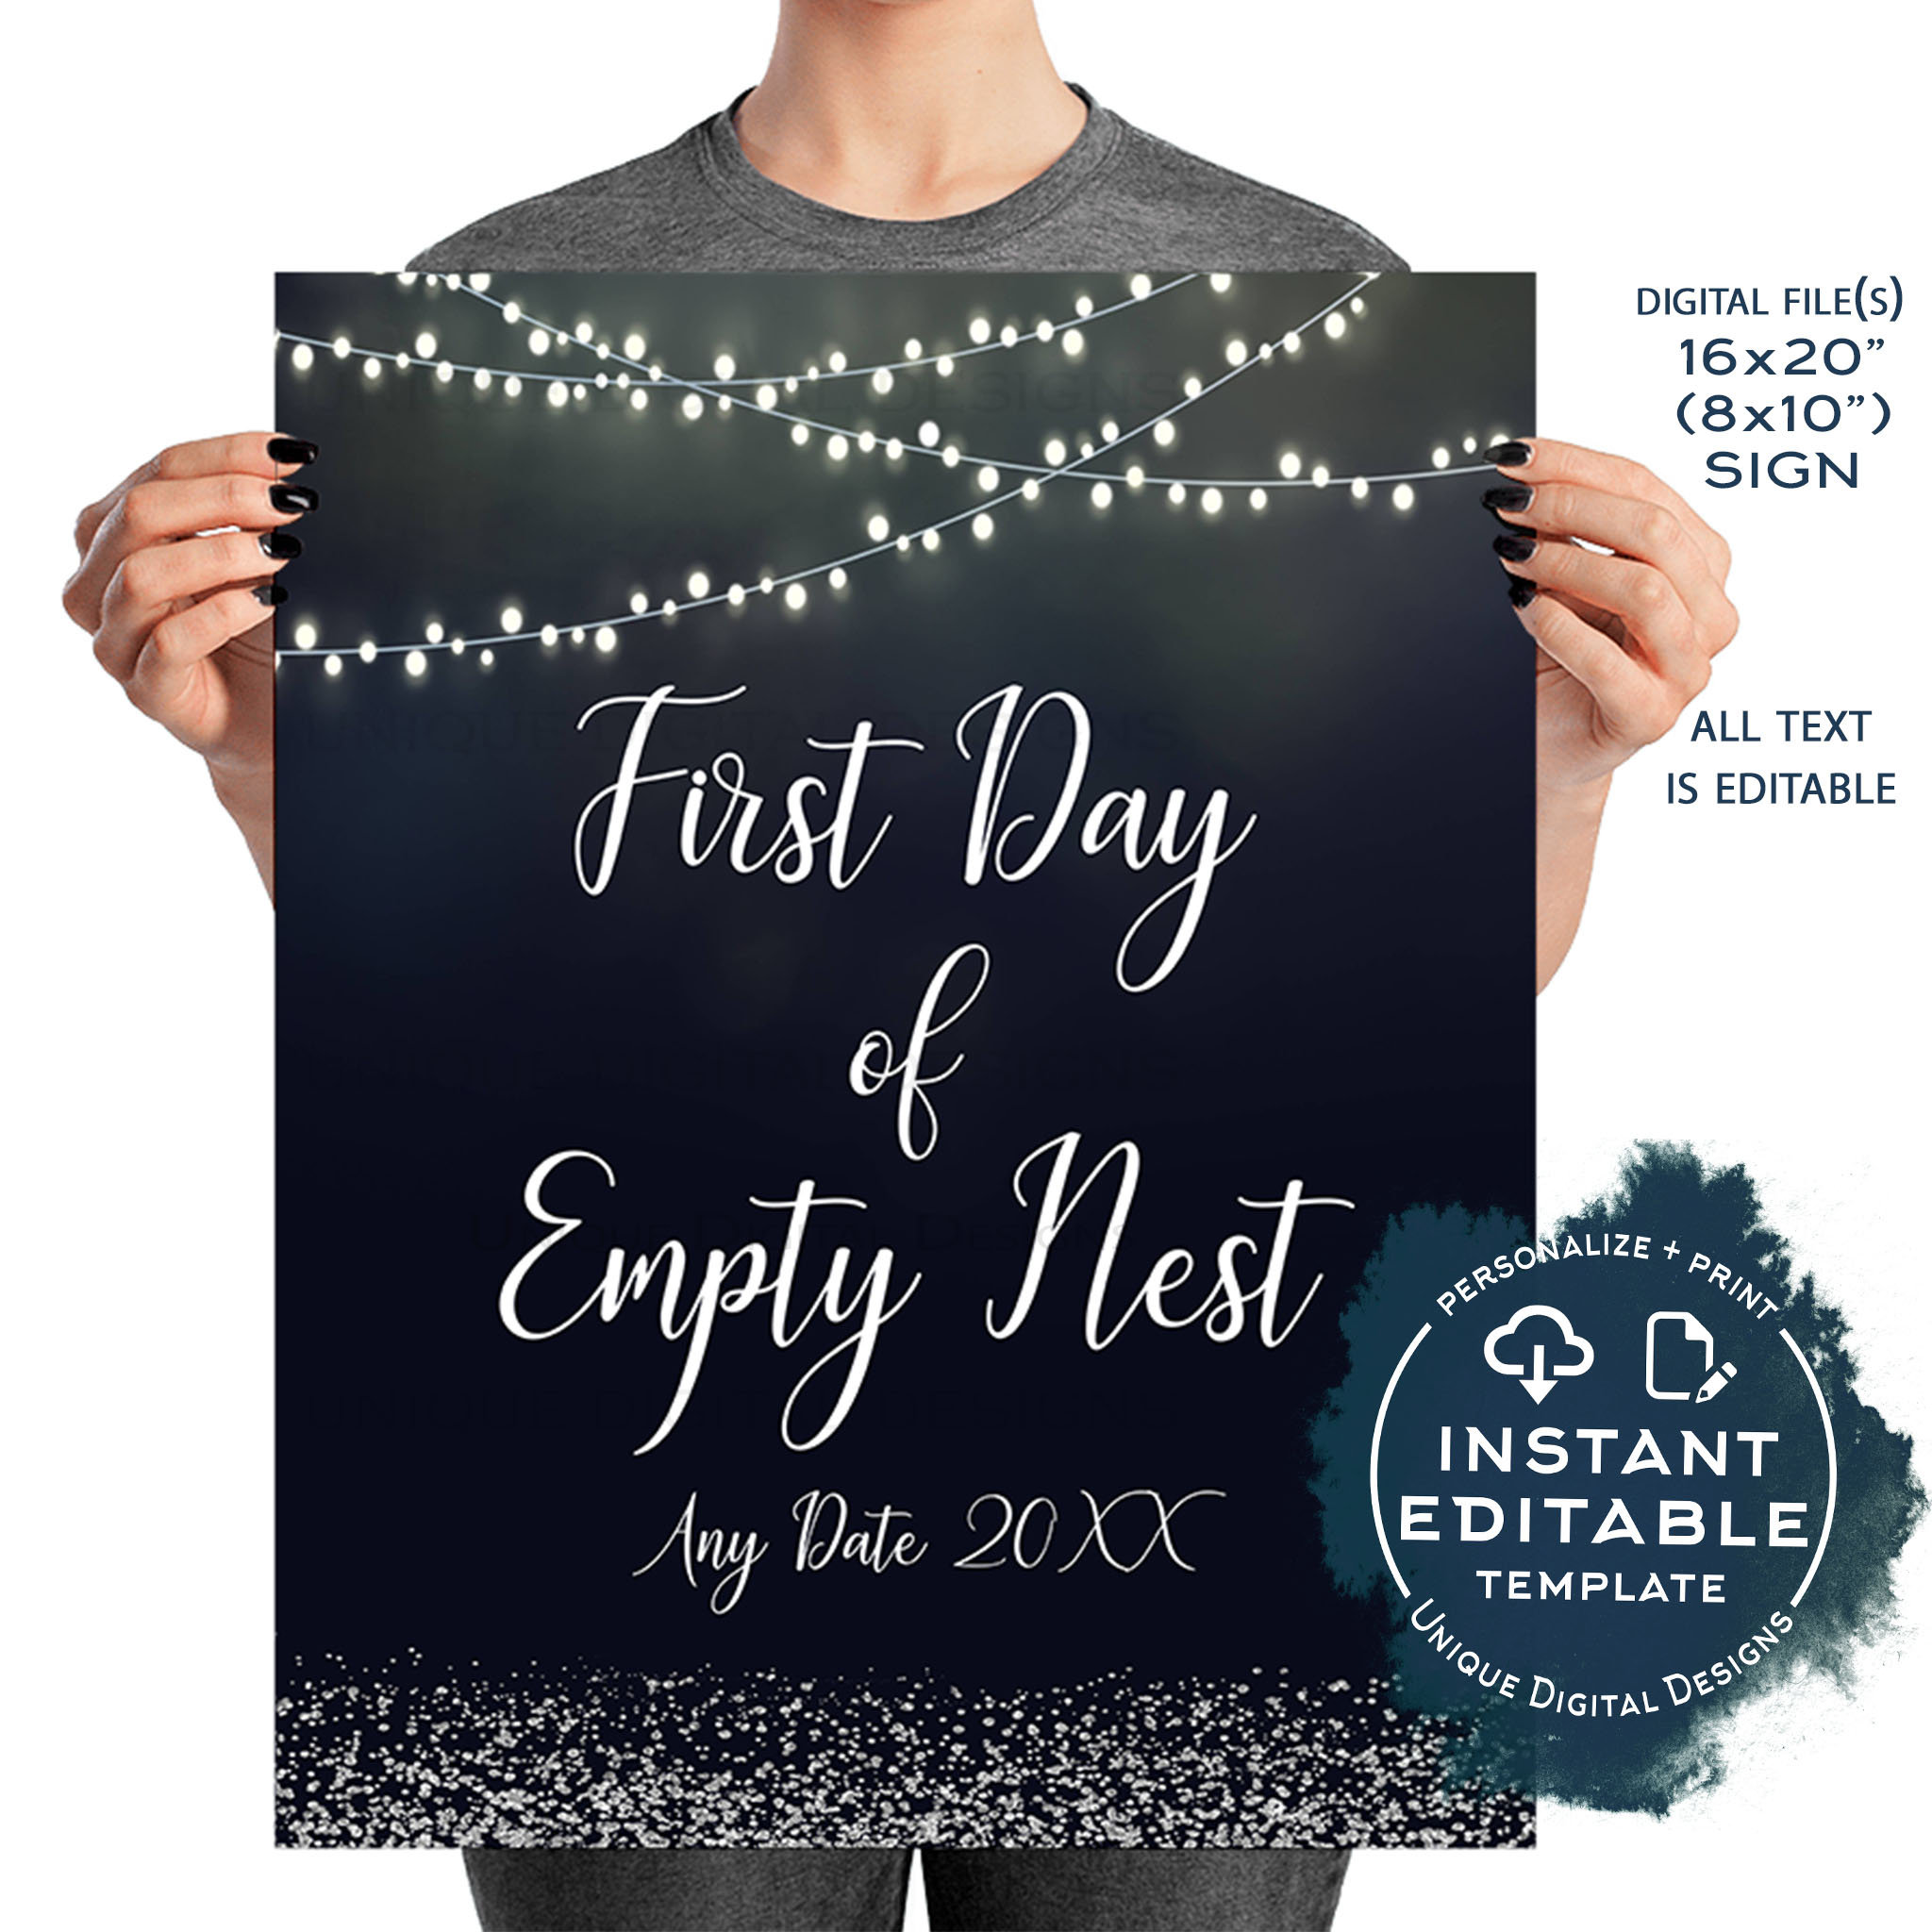 15 Best New Apartment Gift Ideas - Almost Empty Nest